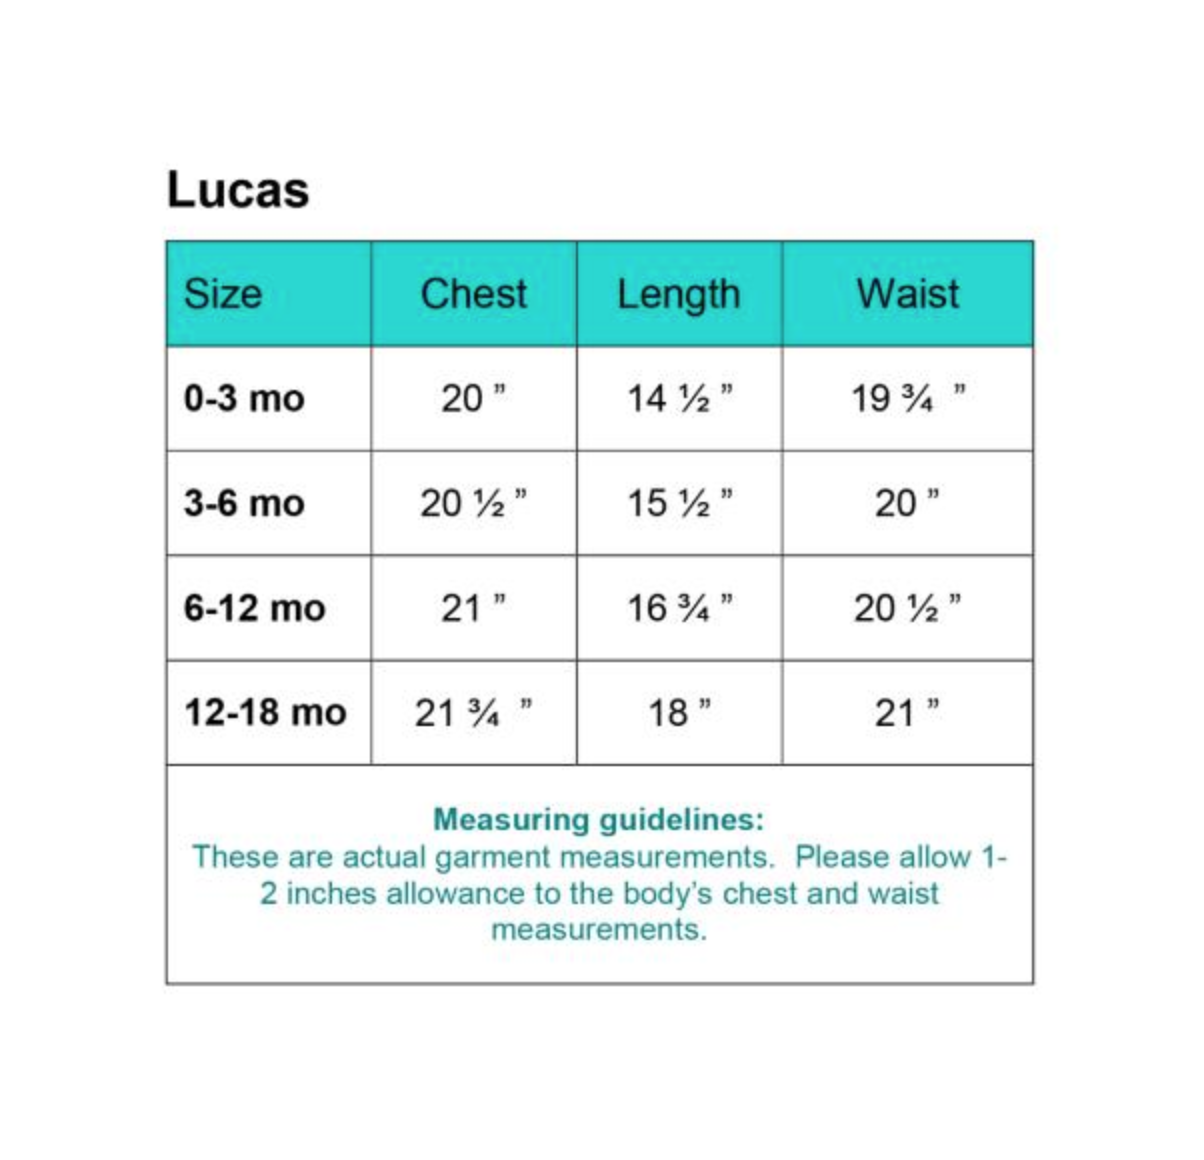 sizing-chart-lucas.png